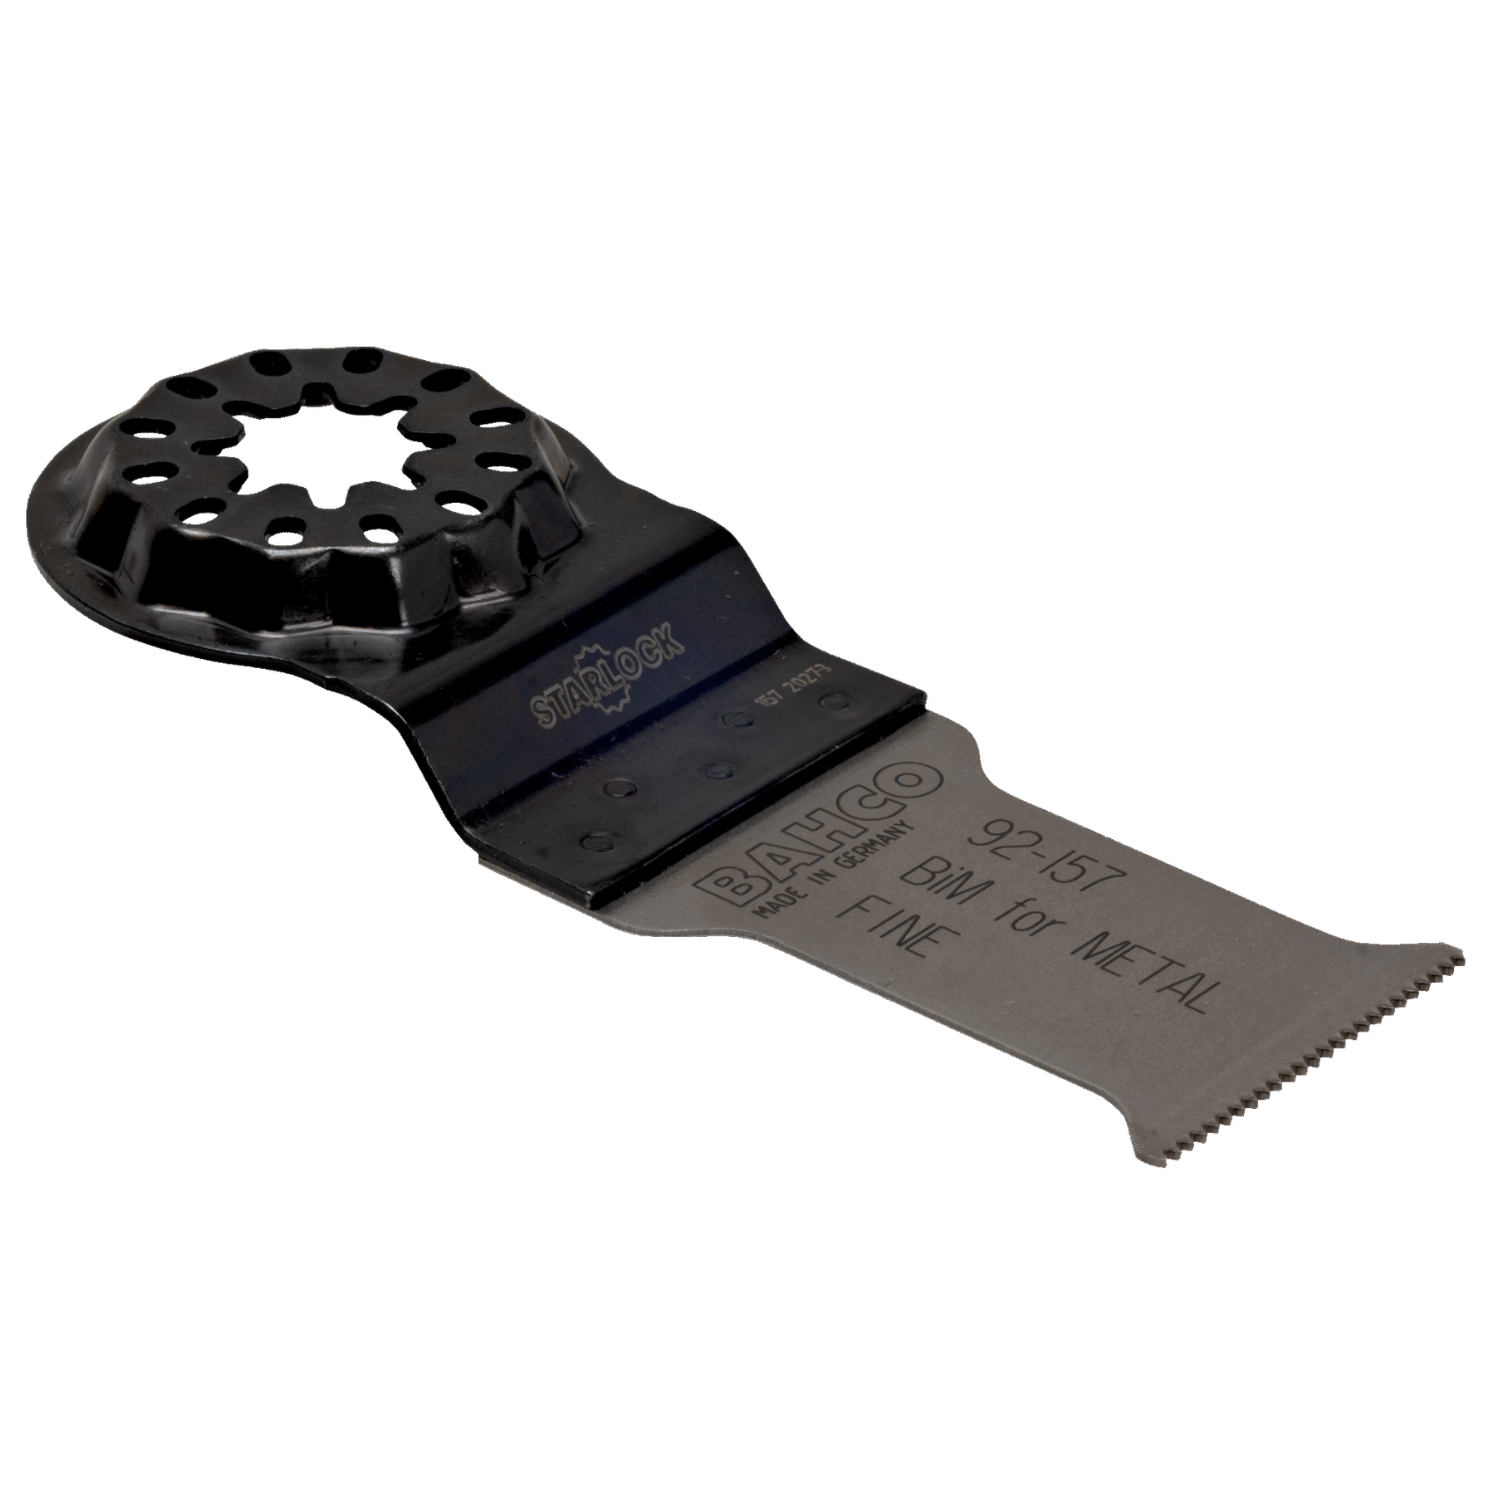 BAHCO 92-FM Multi-tool Standard Blade For Fine Cutting In Metal - Premium Multi-Tool Standard Blade from BAHCO - Shop now at Yew Aik.